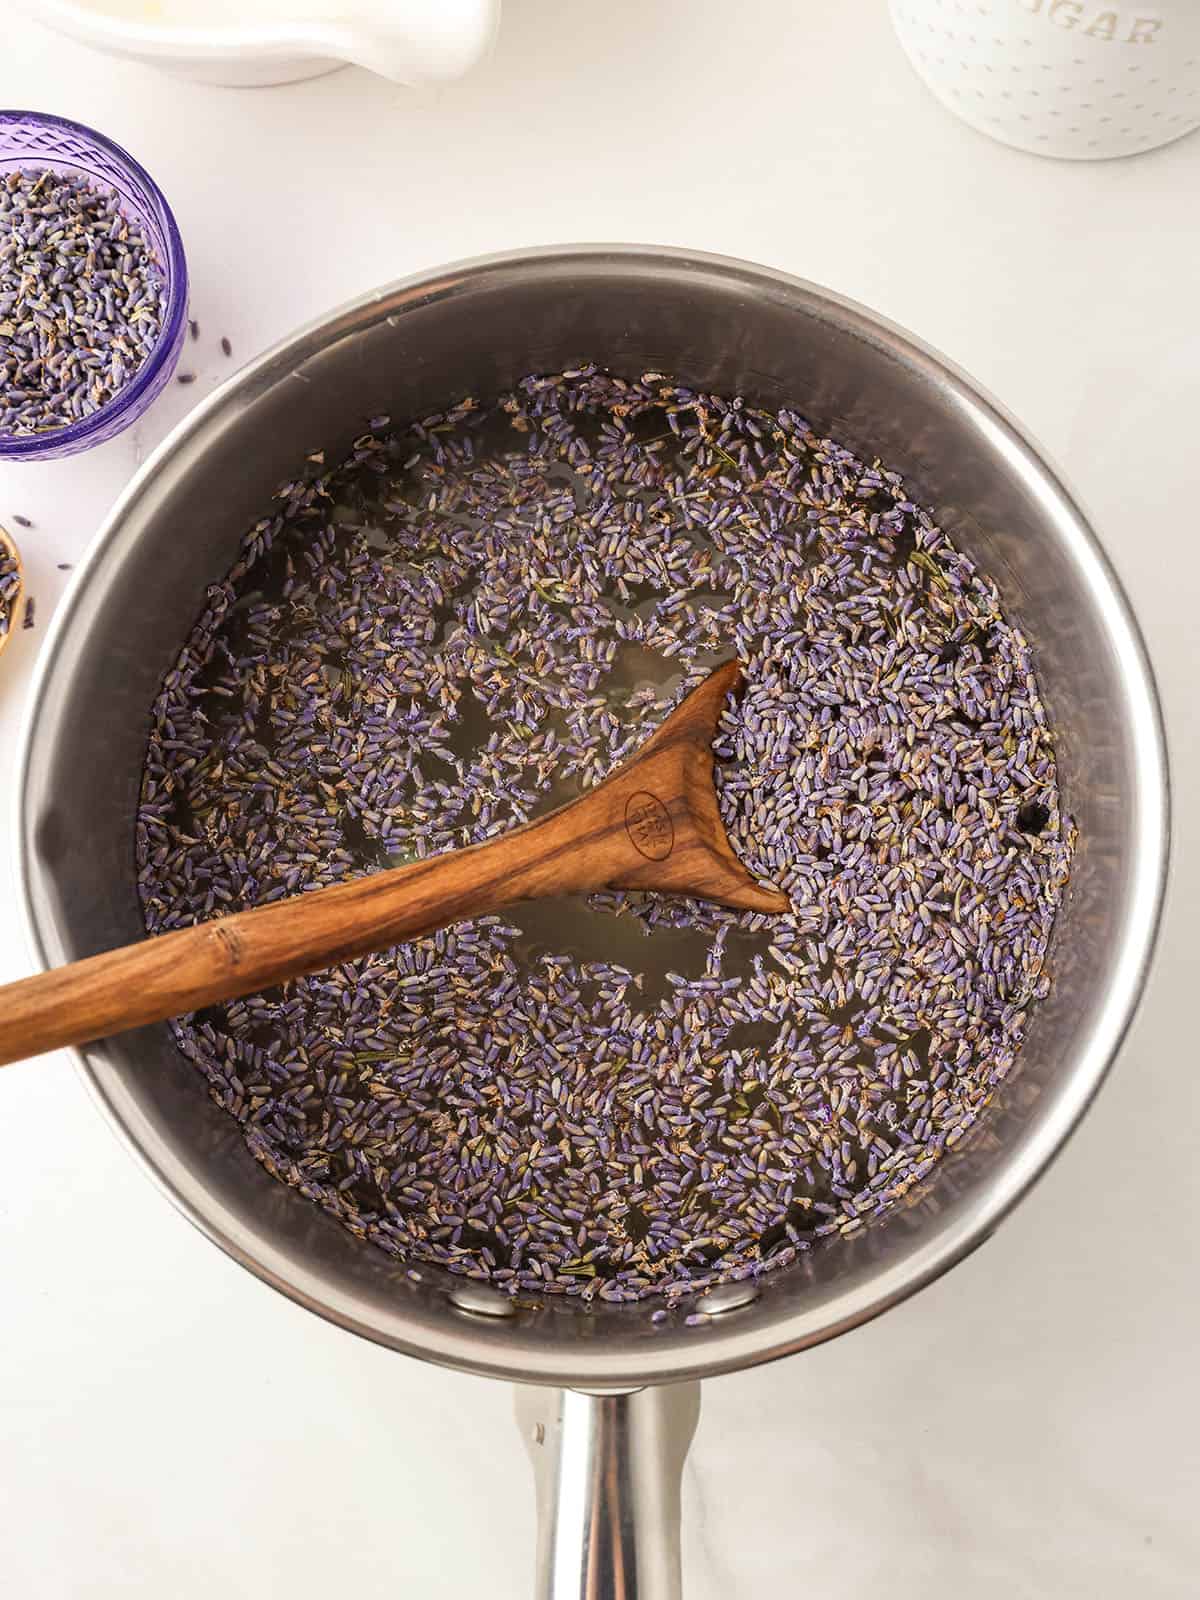 A pot of lavender tea with a wooden spoon in it, top view on a white countertop.